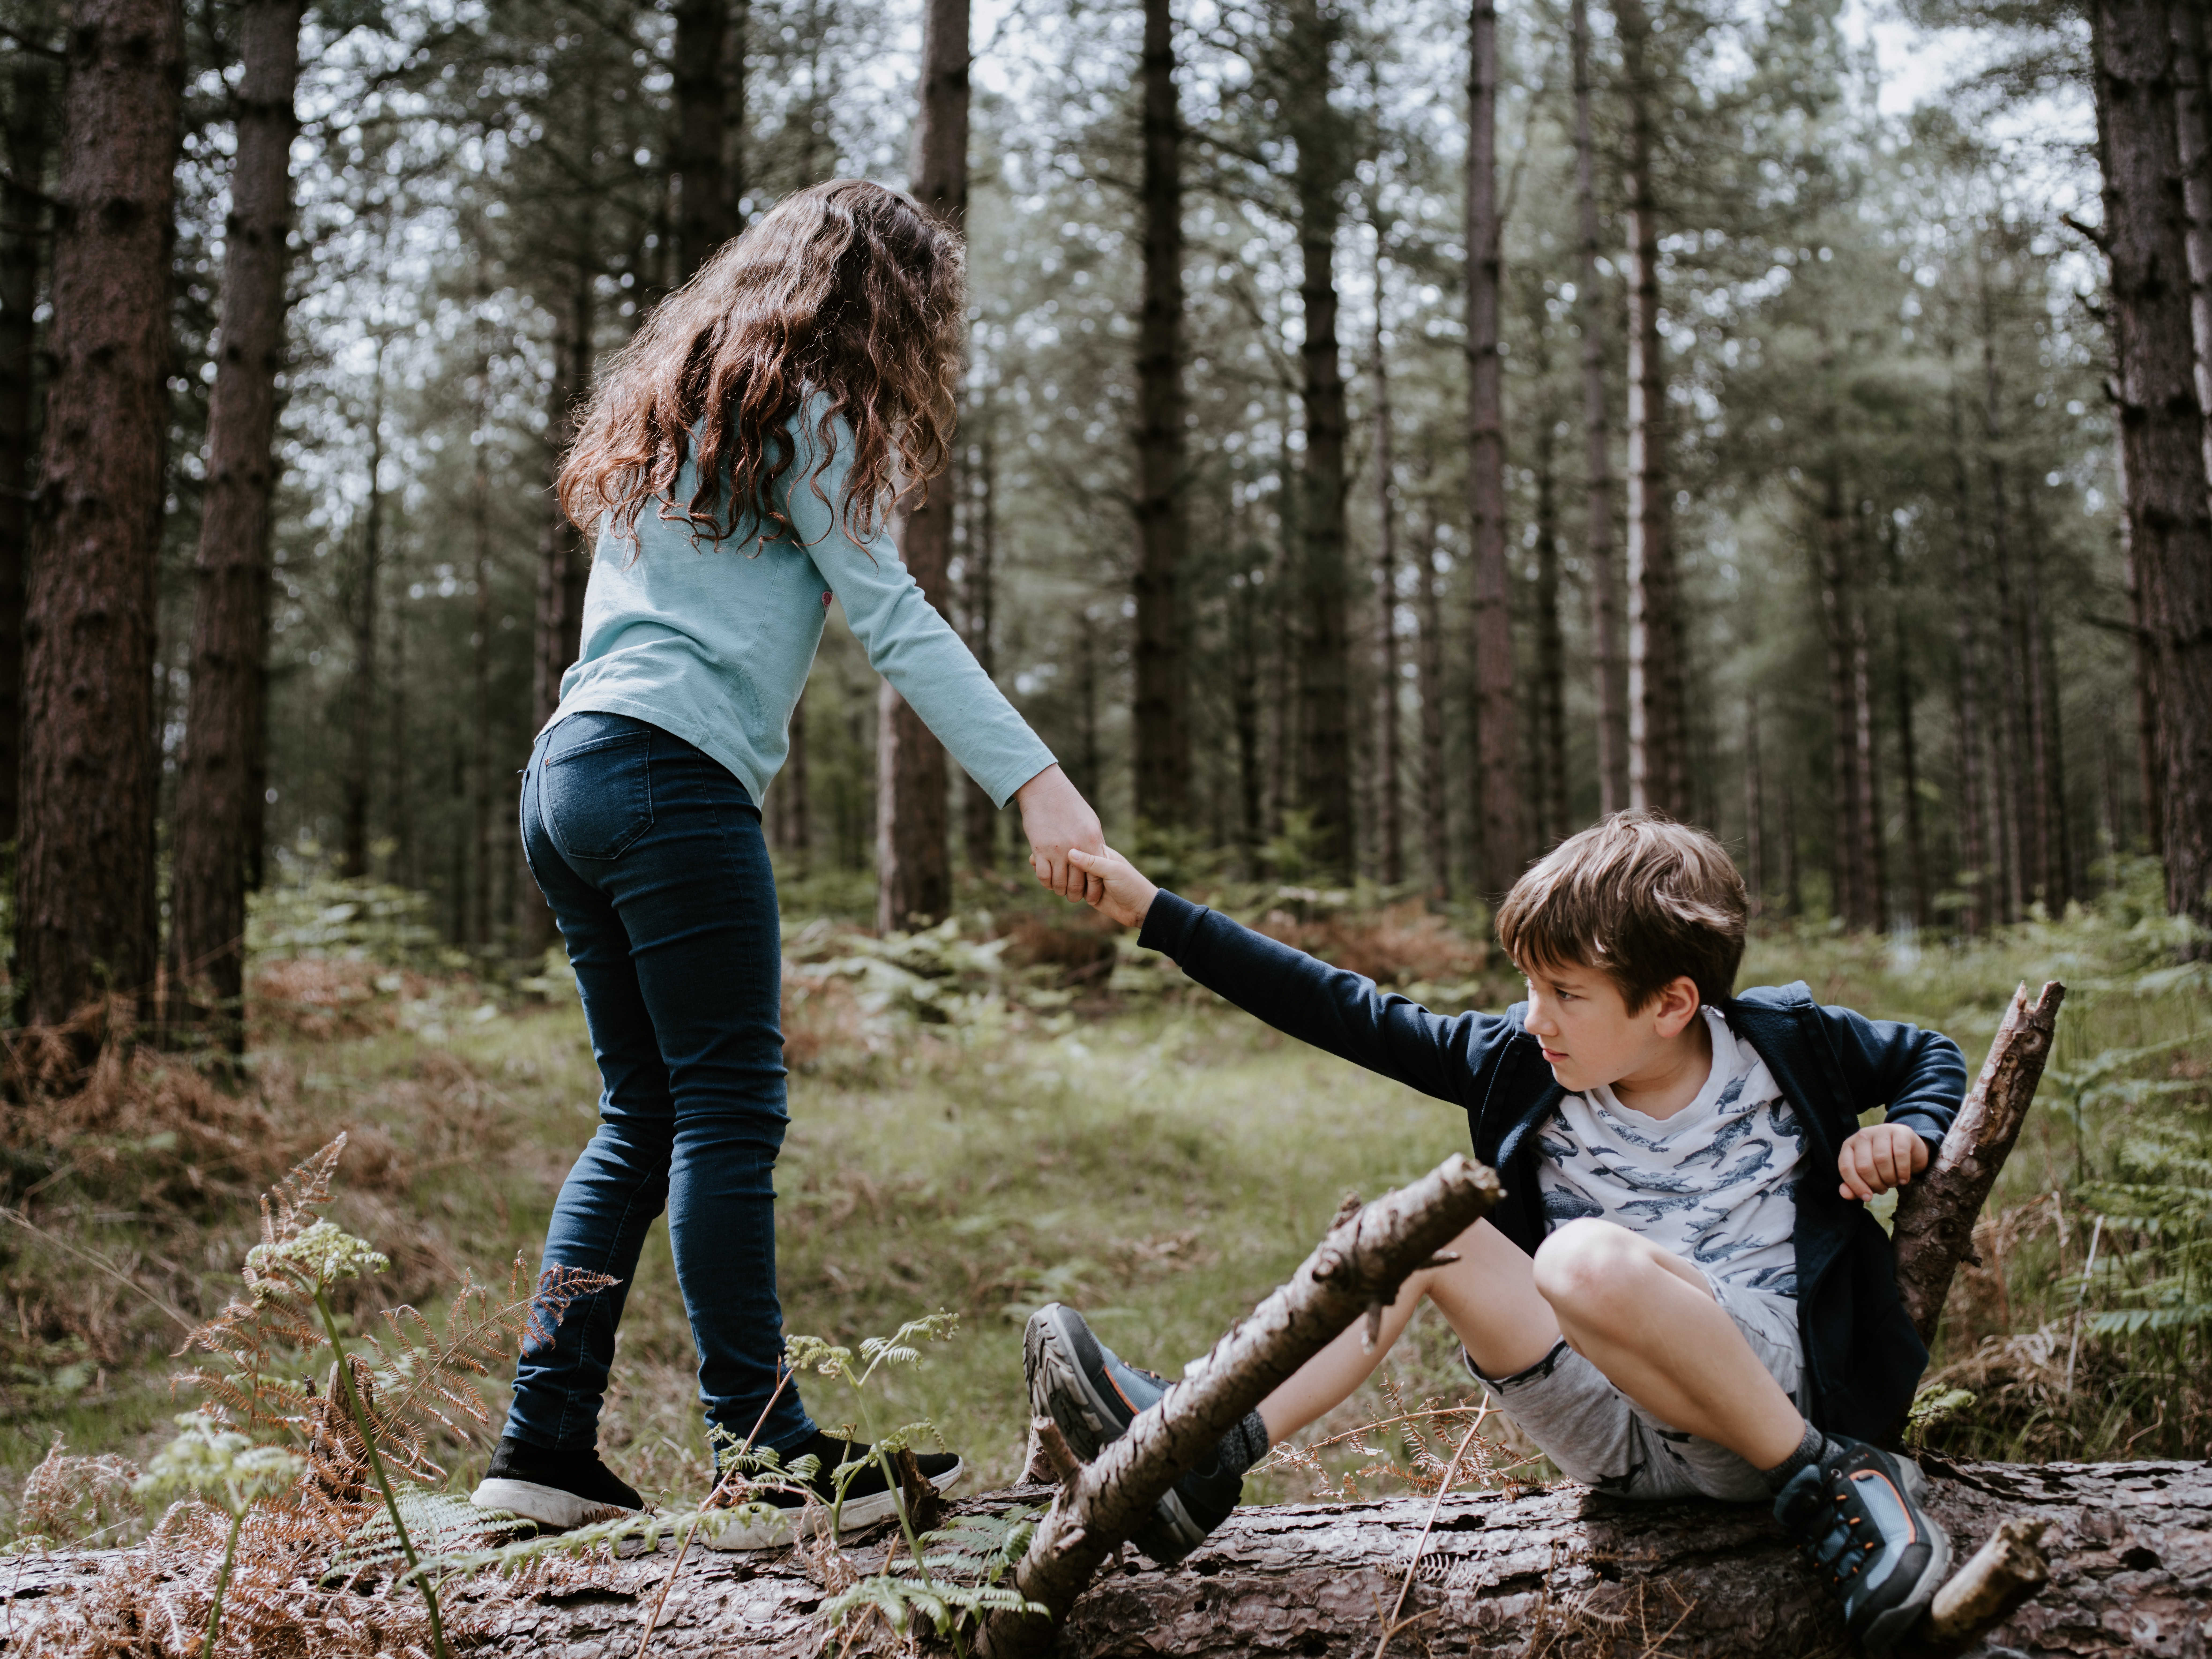 Girl helping boy stand up in the forest